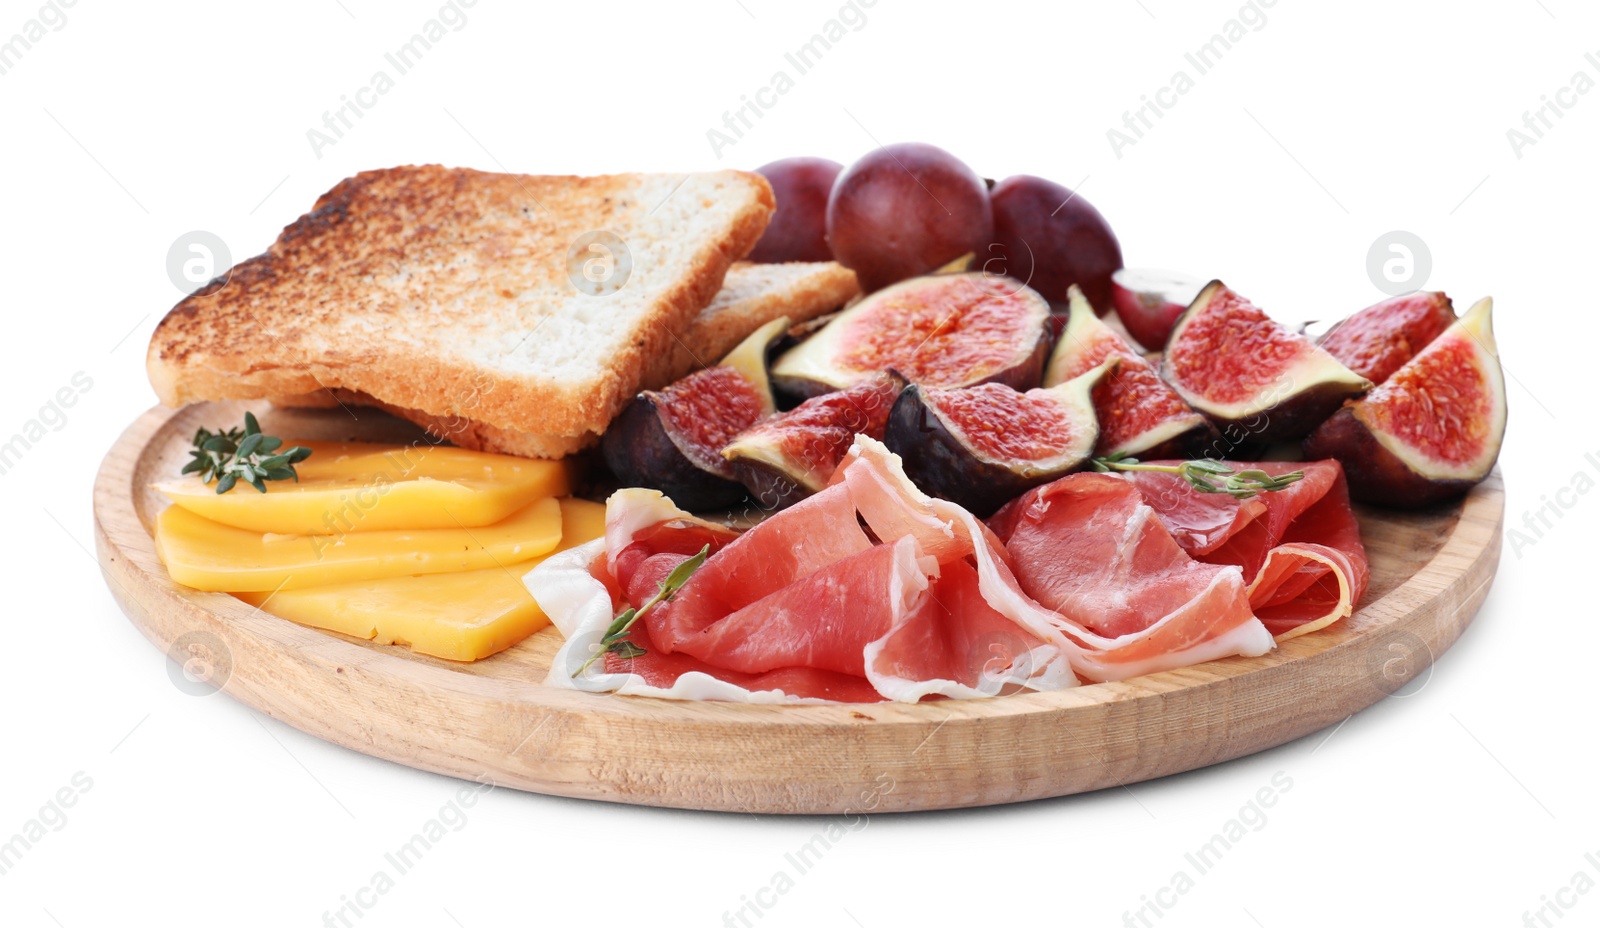 Photo of Delicious ripe figs, prosciutto and cheese on white background